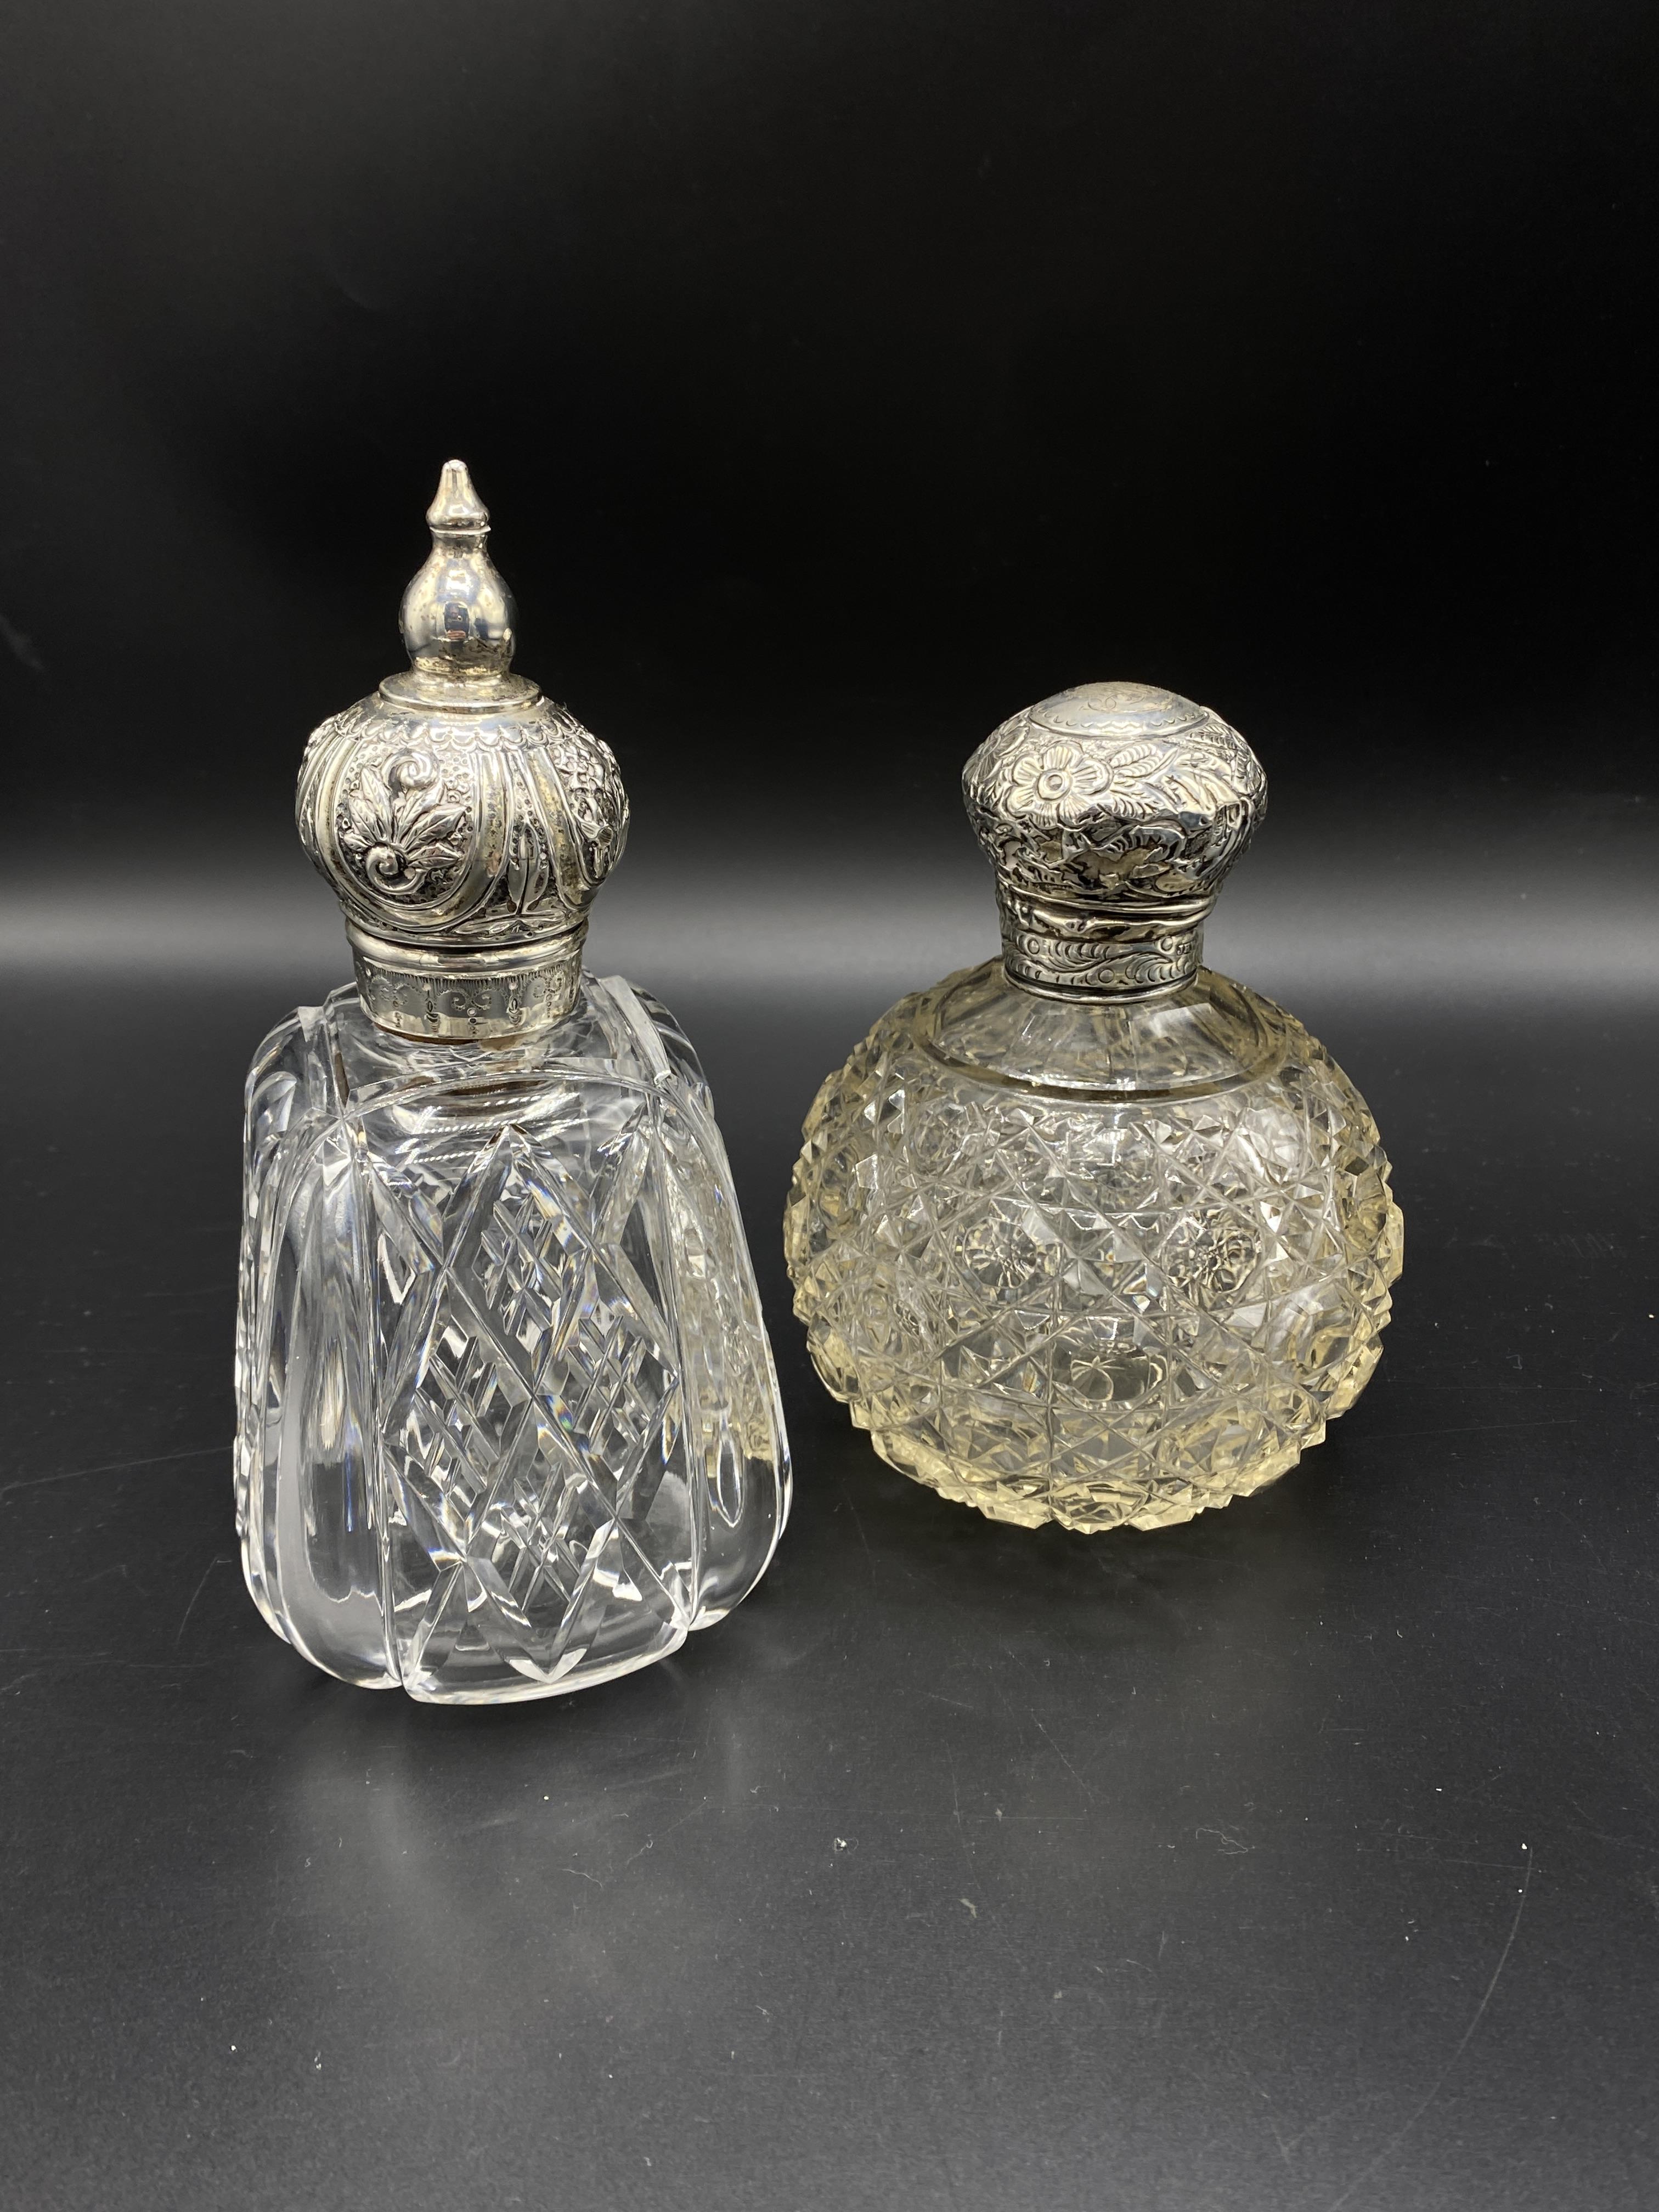 Two cut glass perfume bottles - Image 2 of 3